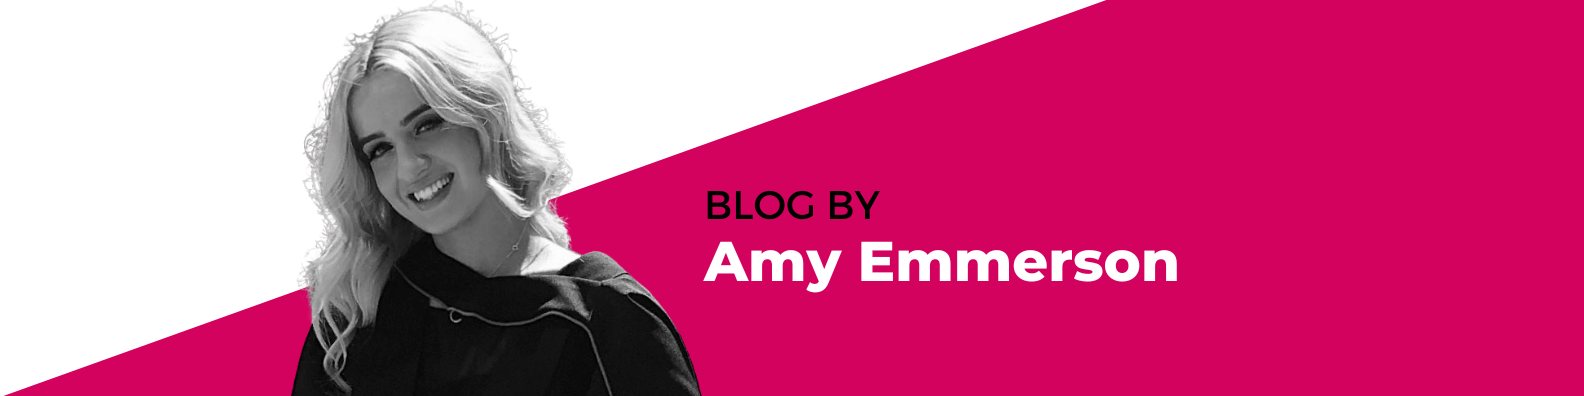 blog by amy Emmerson